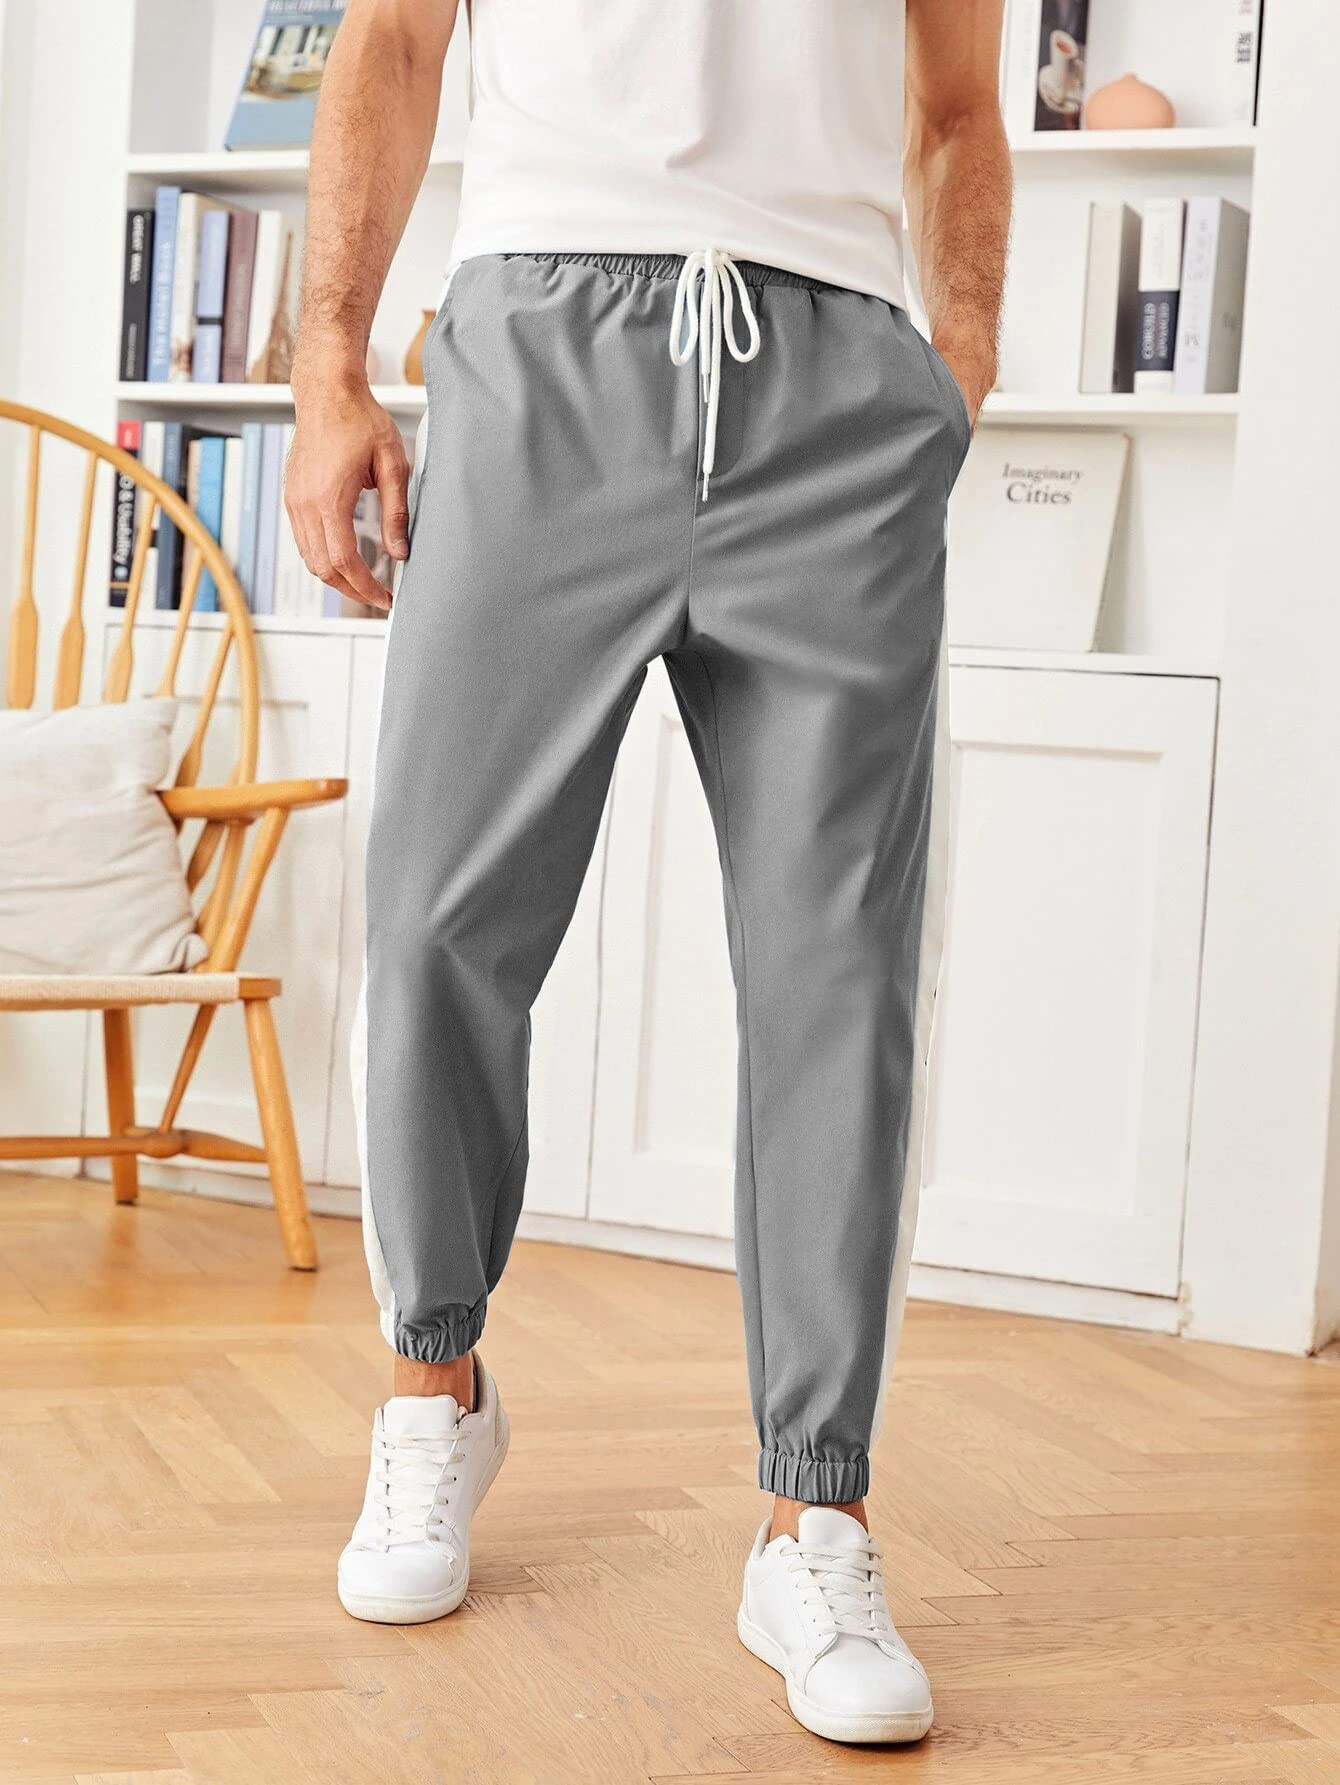 Mens Striped Skinny Track Pants Hip Hop Fitness Streetwear Sports Trousers  For Men From Cinda01, $13.19 | DHgate.Com